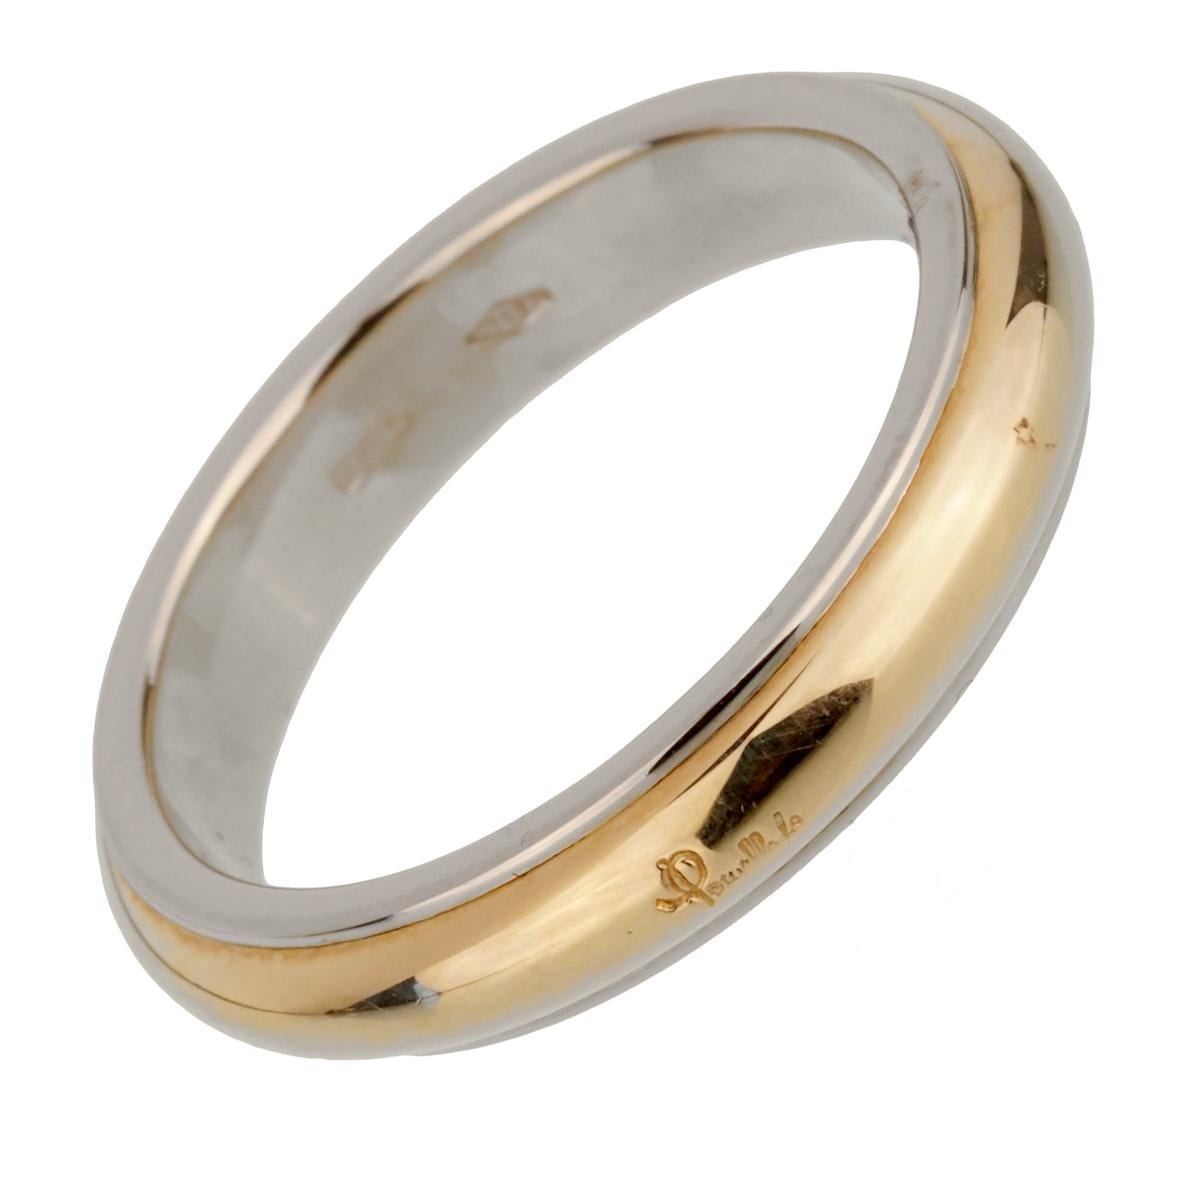 A chic brand new Pomellato band style ring crafted in 18k white and yellow gold. The ring measures a size 6 3/4 and is resizeable

Pomellato Retail Price: $1200
Sku: 2203